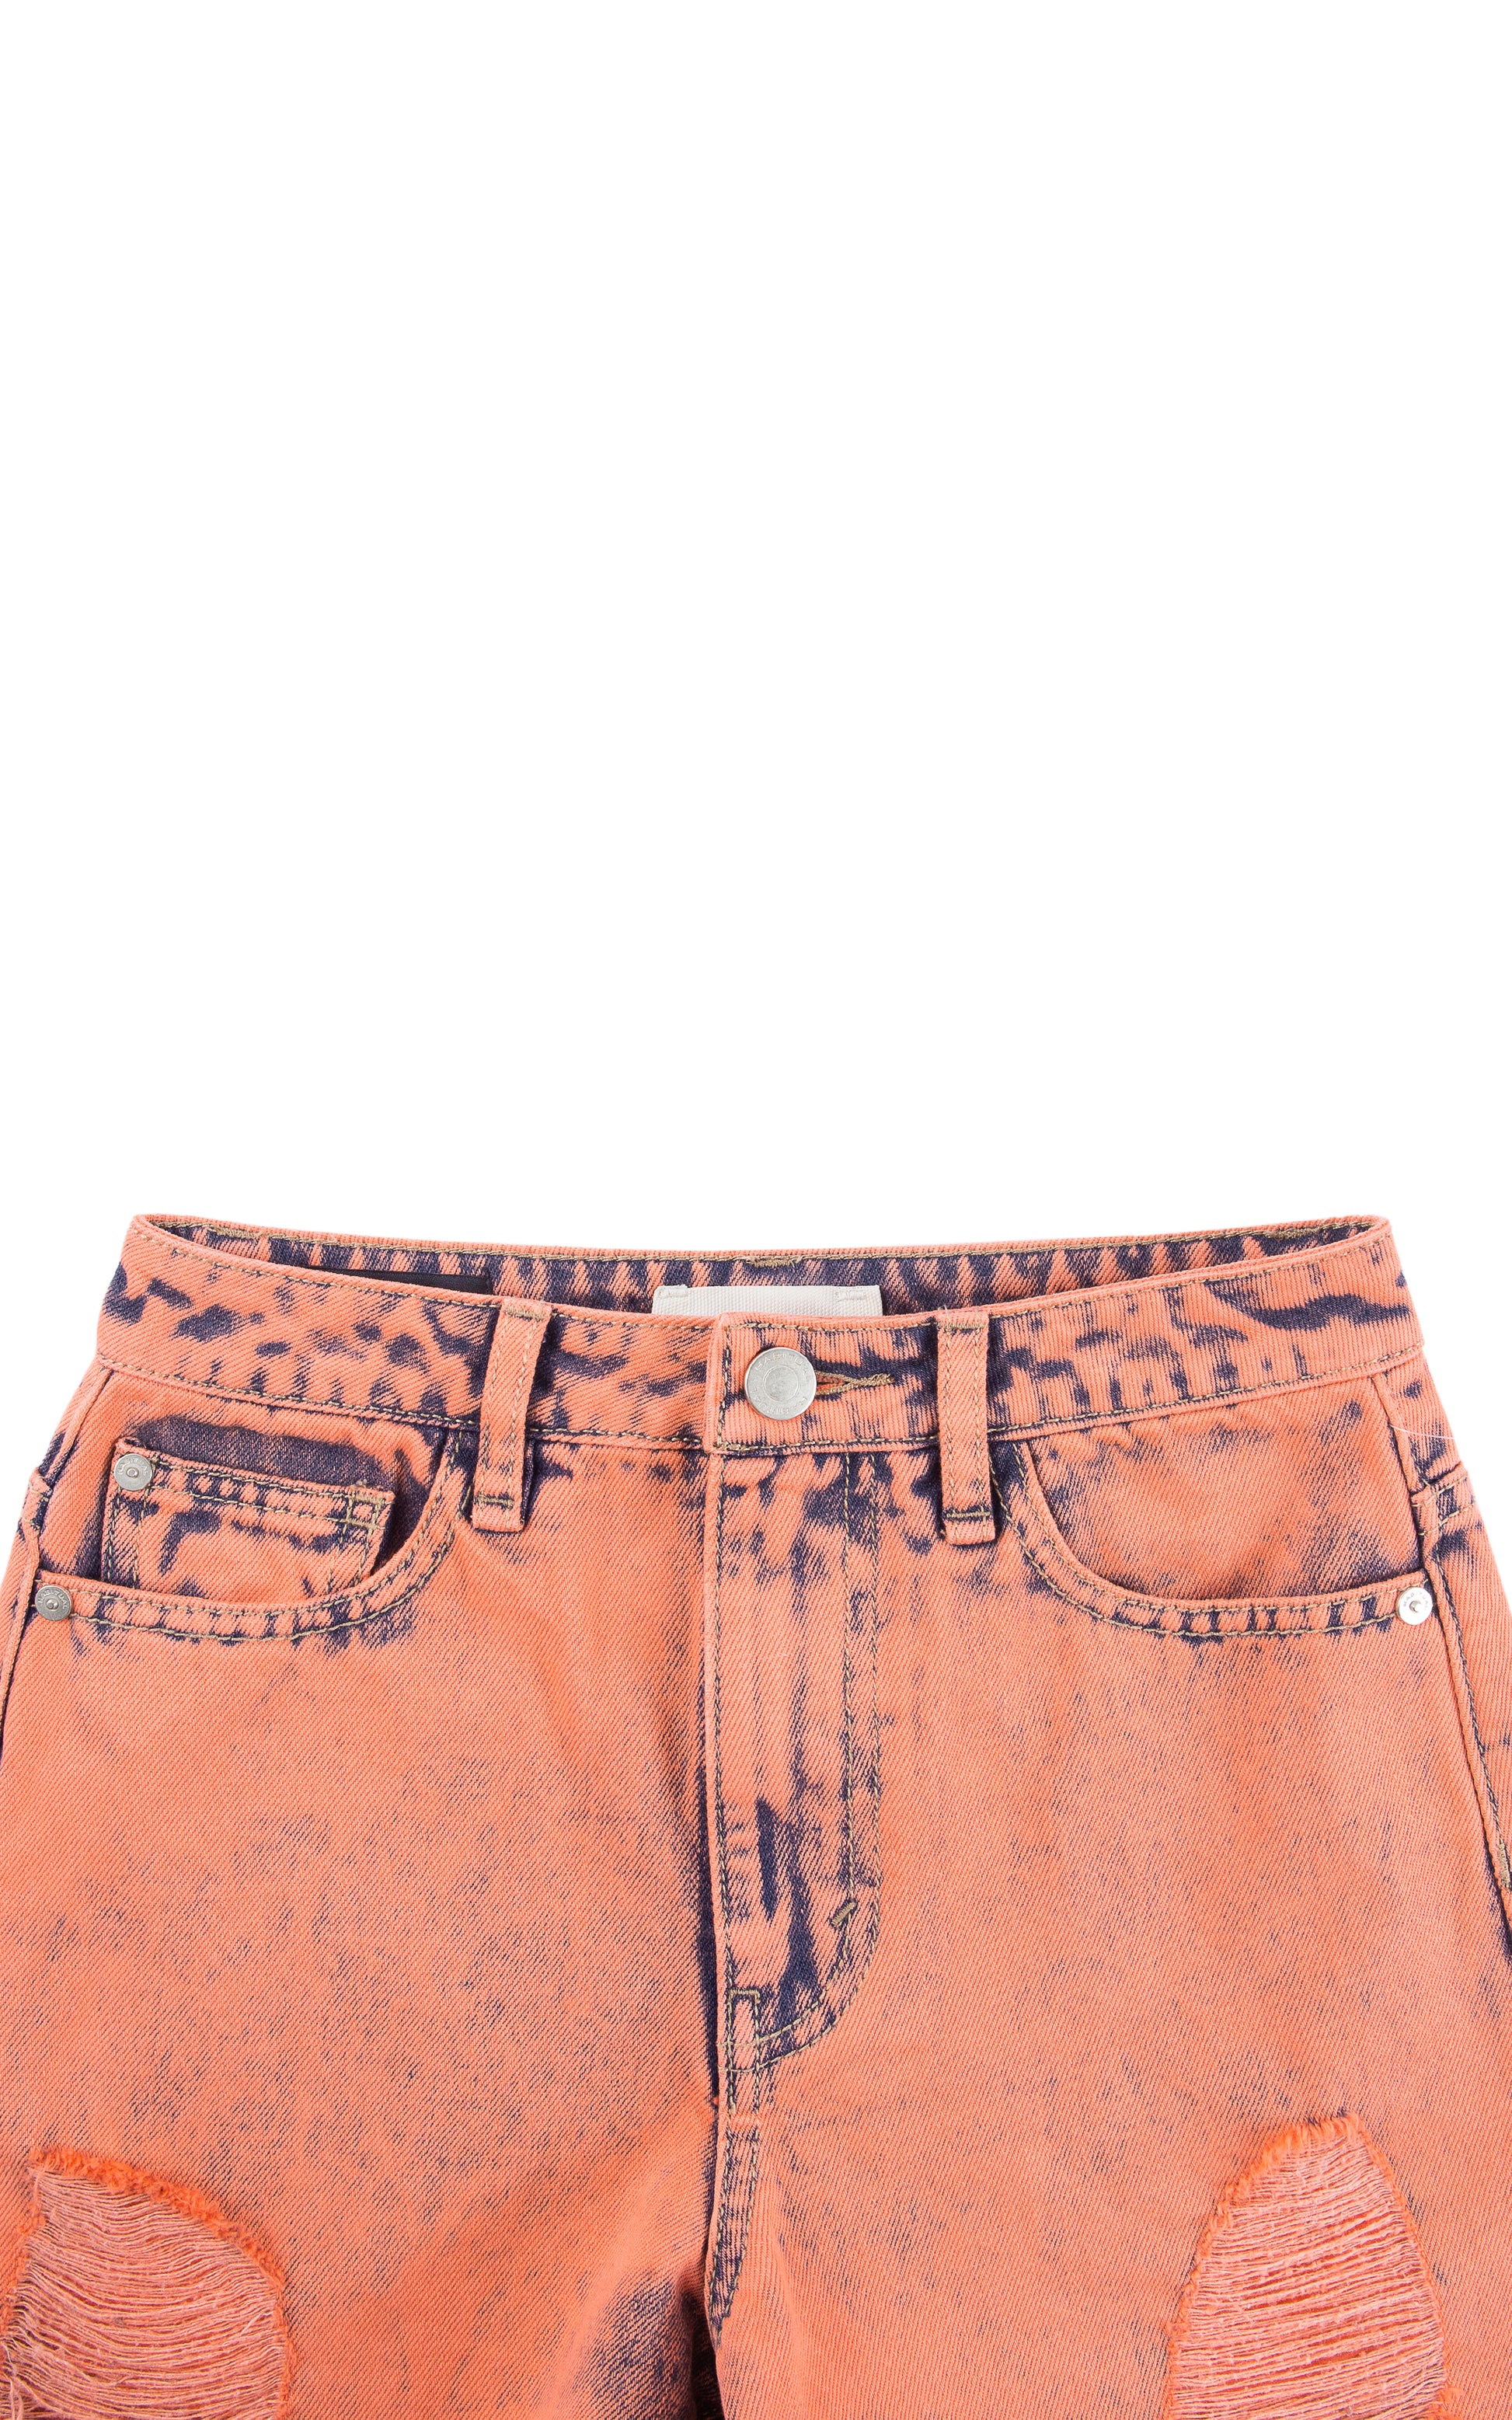 Close up of coral, ripped-style high-waisted denim shorts